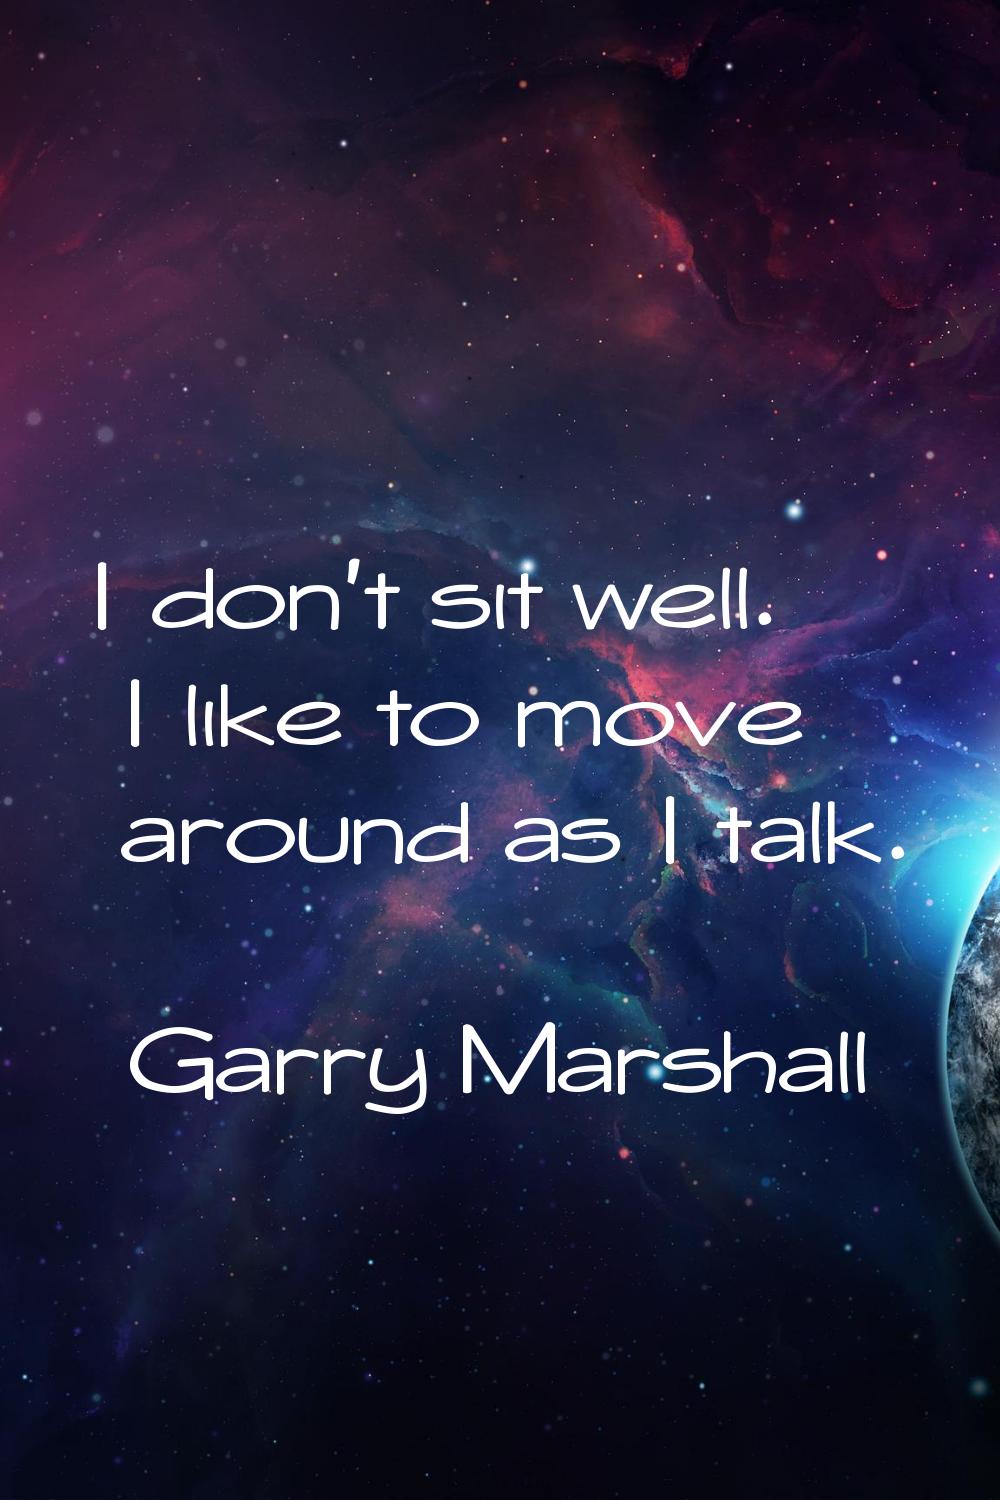 I don't sit well. I like to move around as I talk.